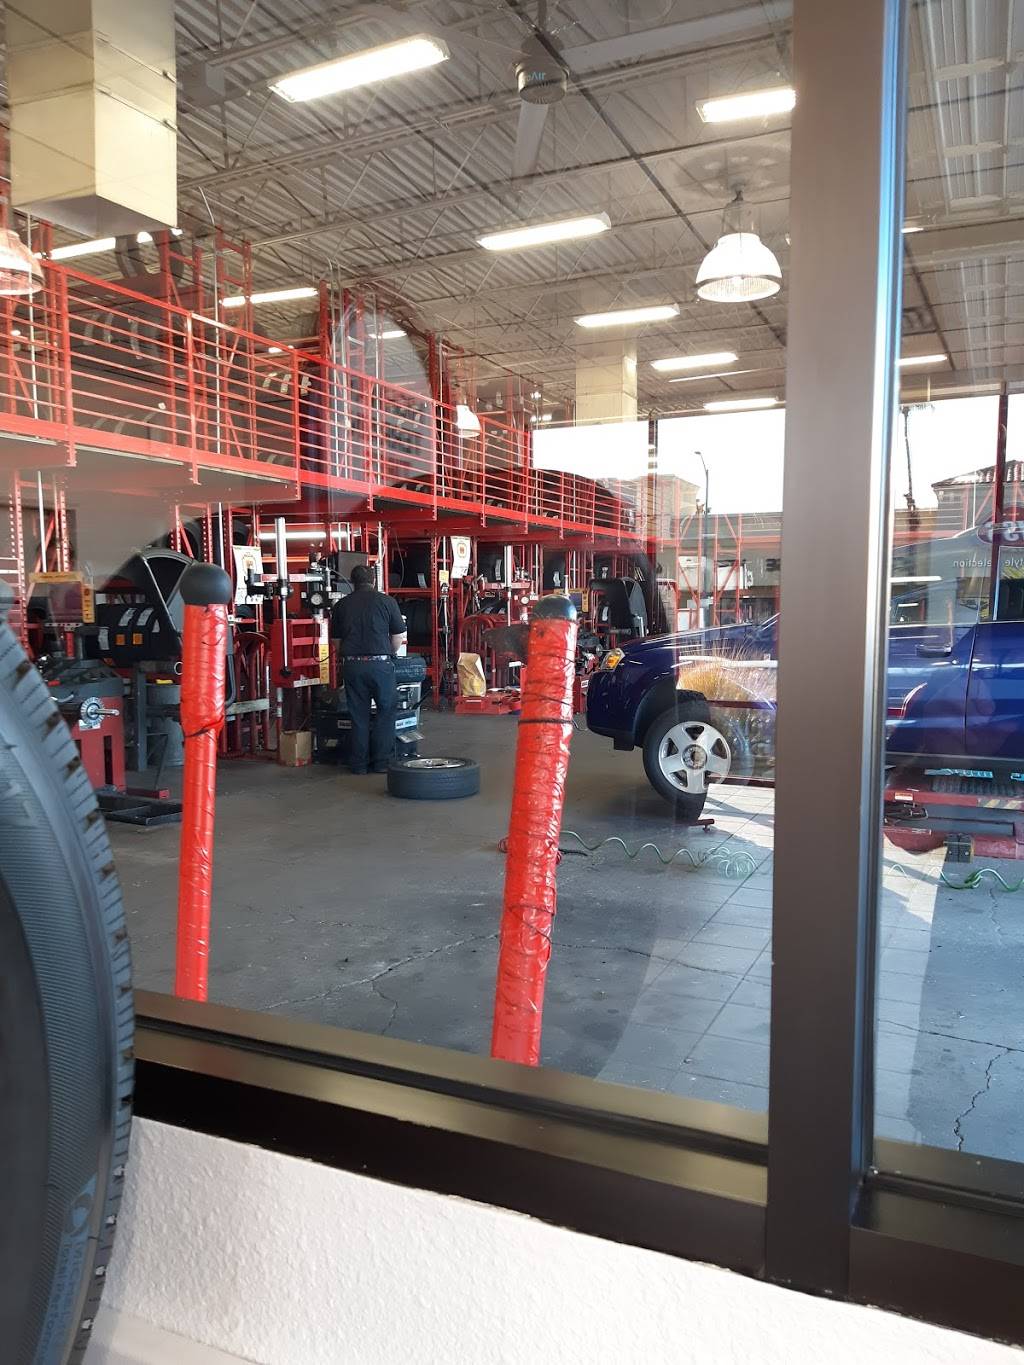 Discount Tire | 3835 S Maryland Pkwy, Las Vegas, NV 89119, USA | Phone: (702) 794-4338